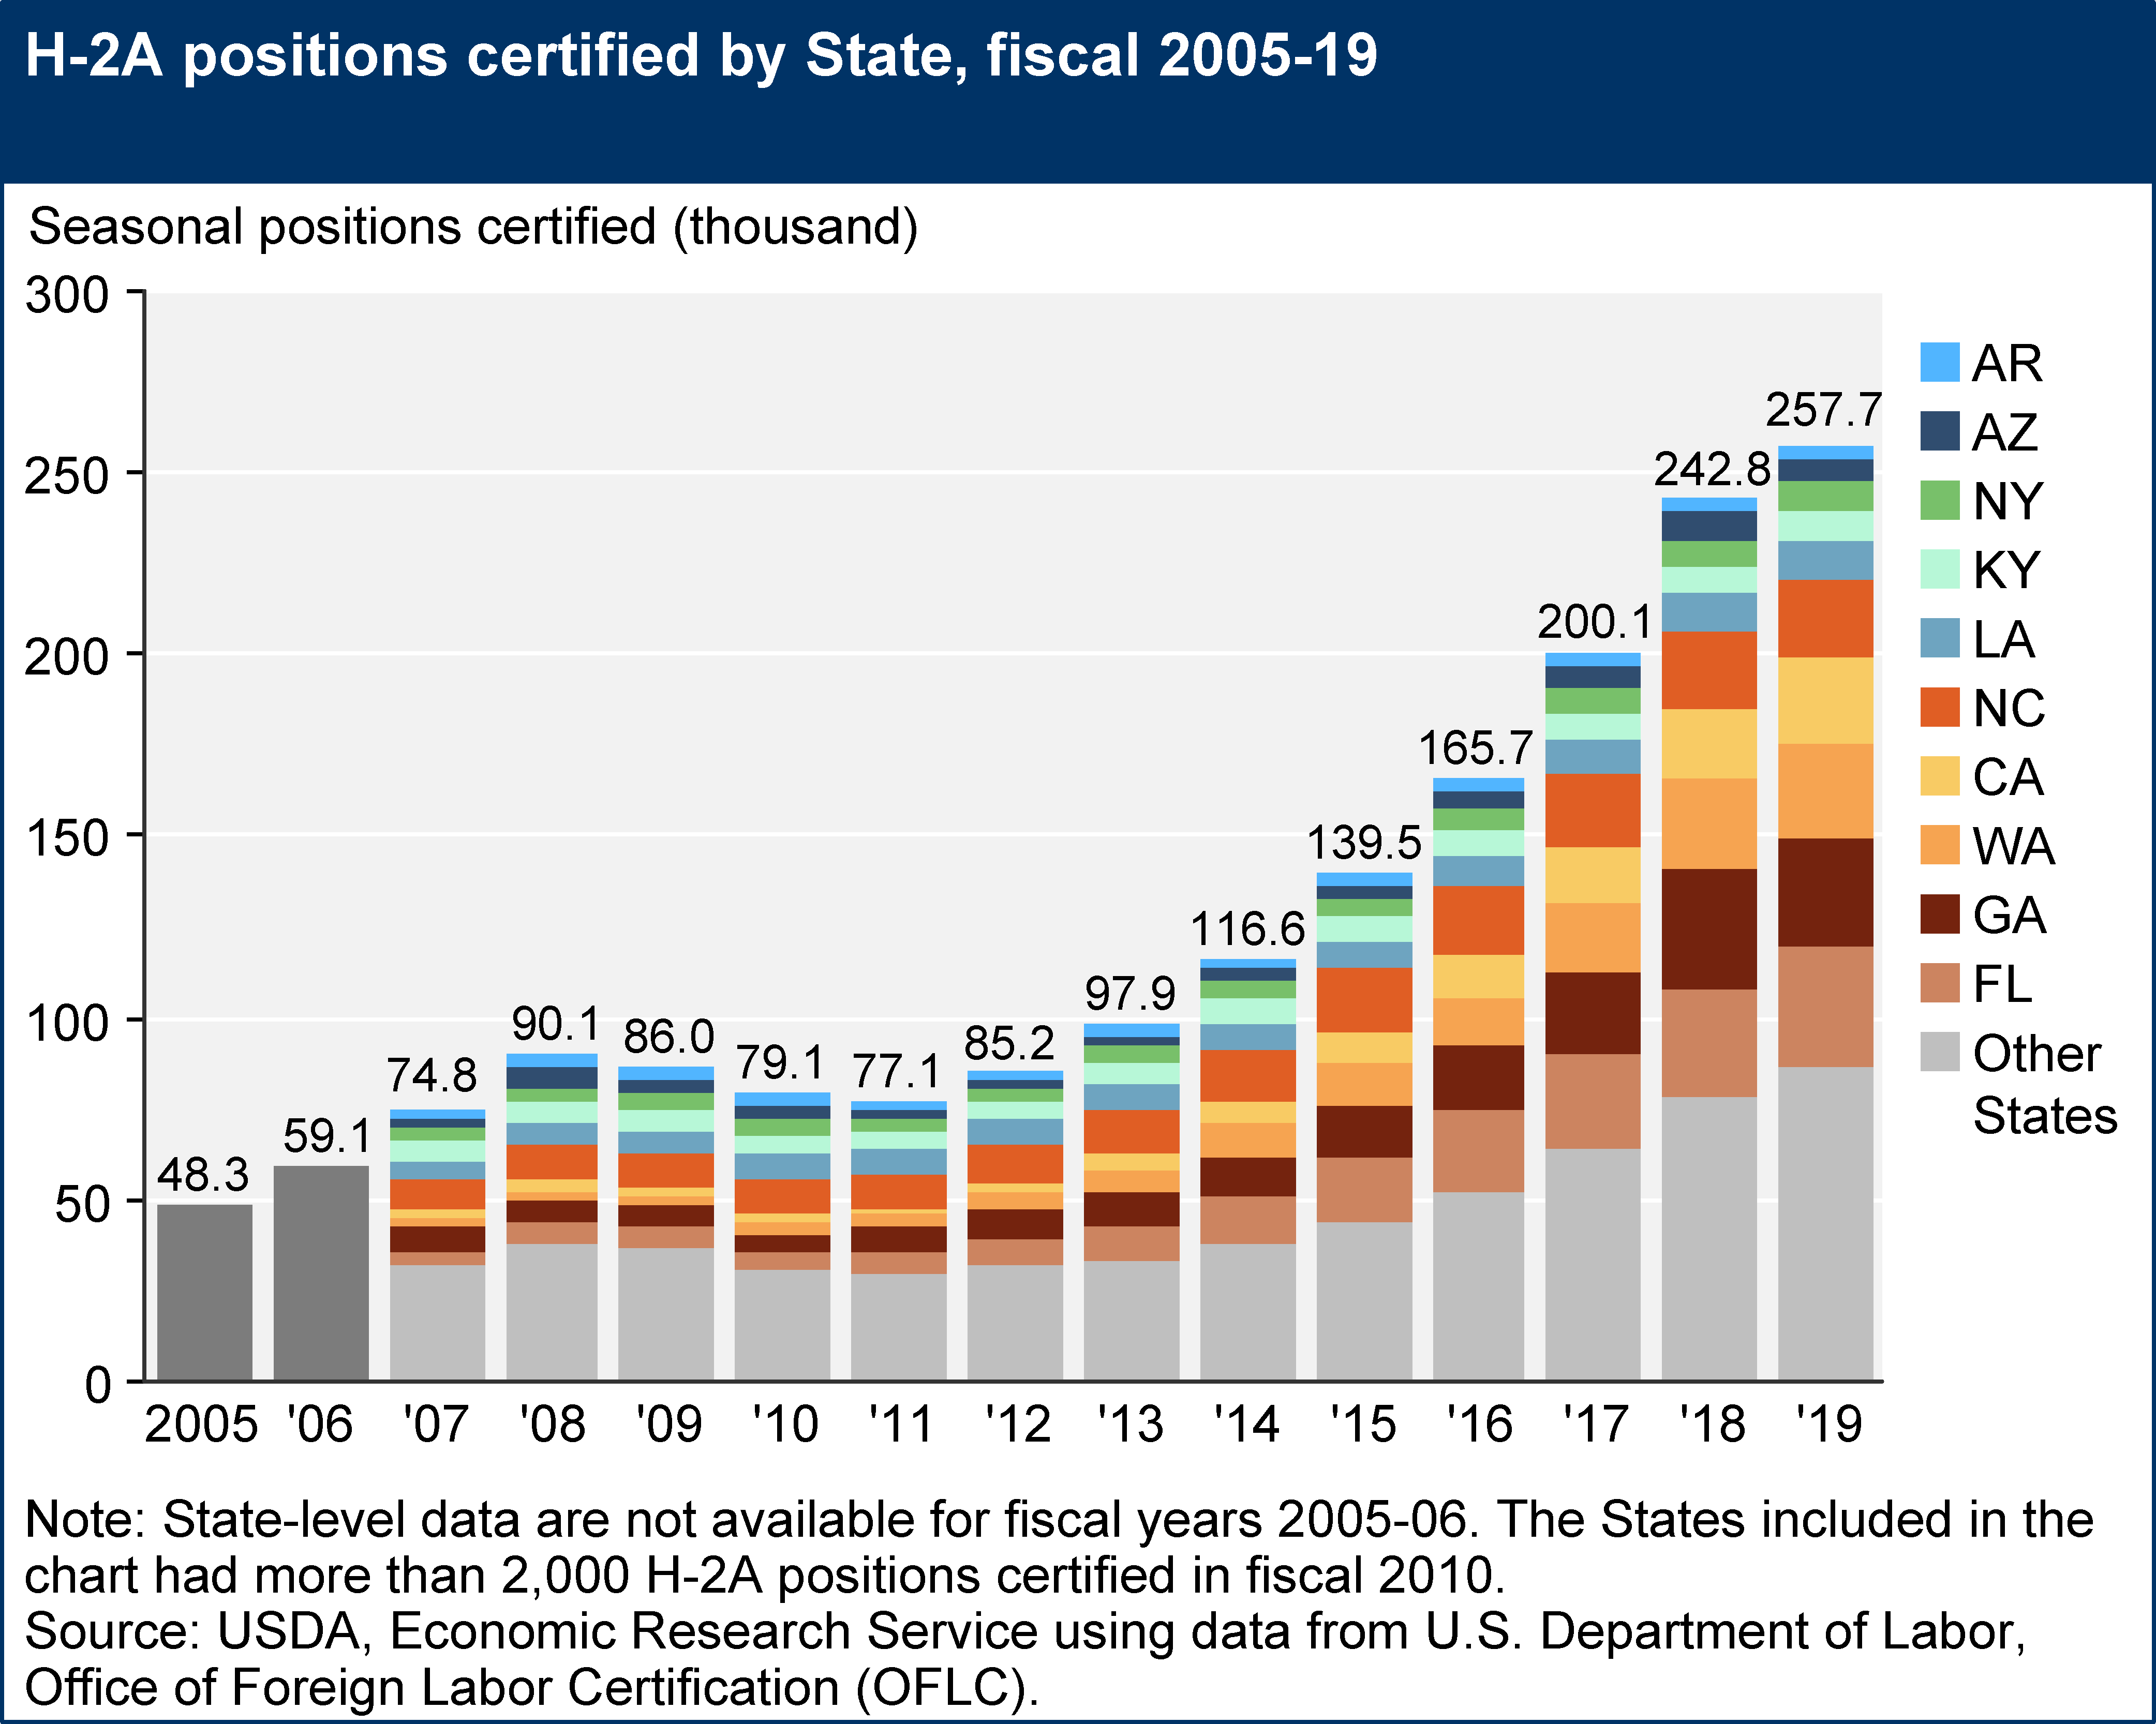 H-2A positions certified by State, fiscal 2005 - 2019